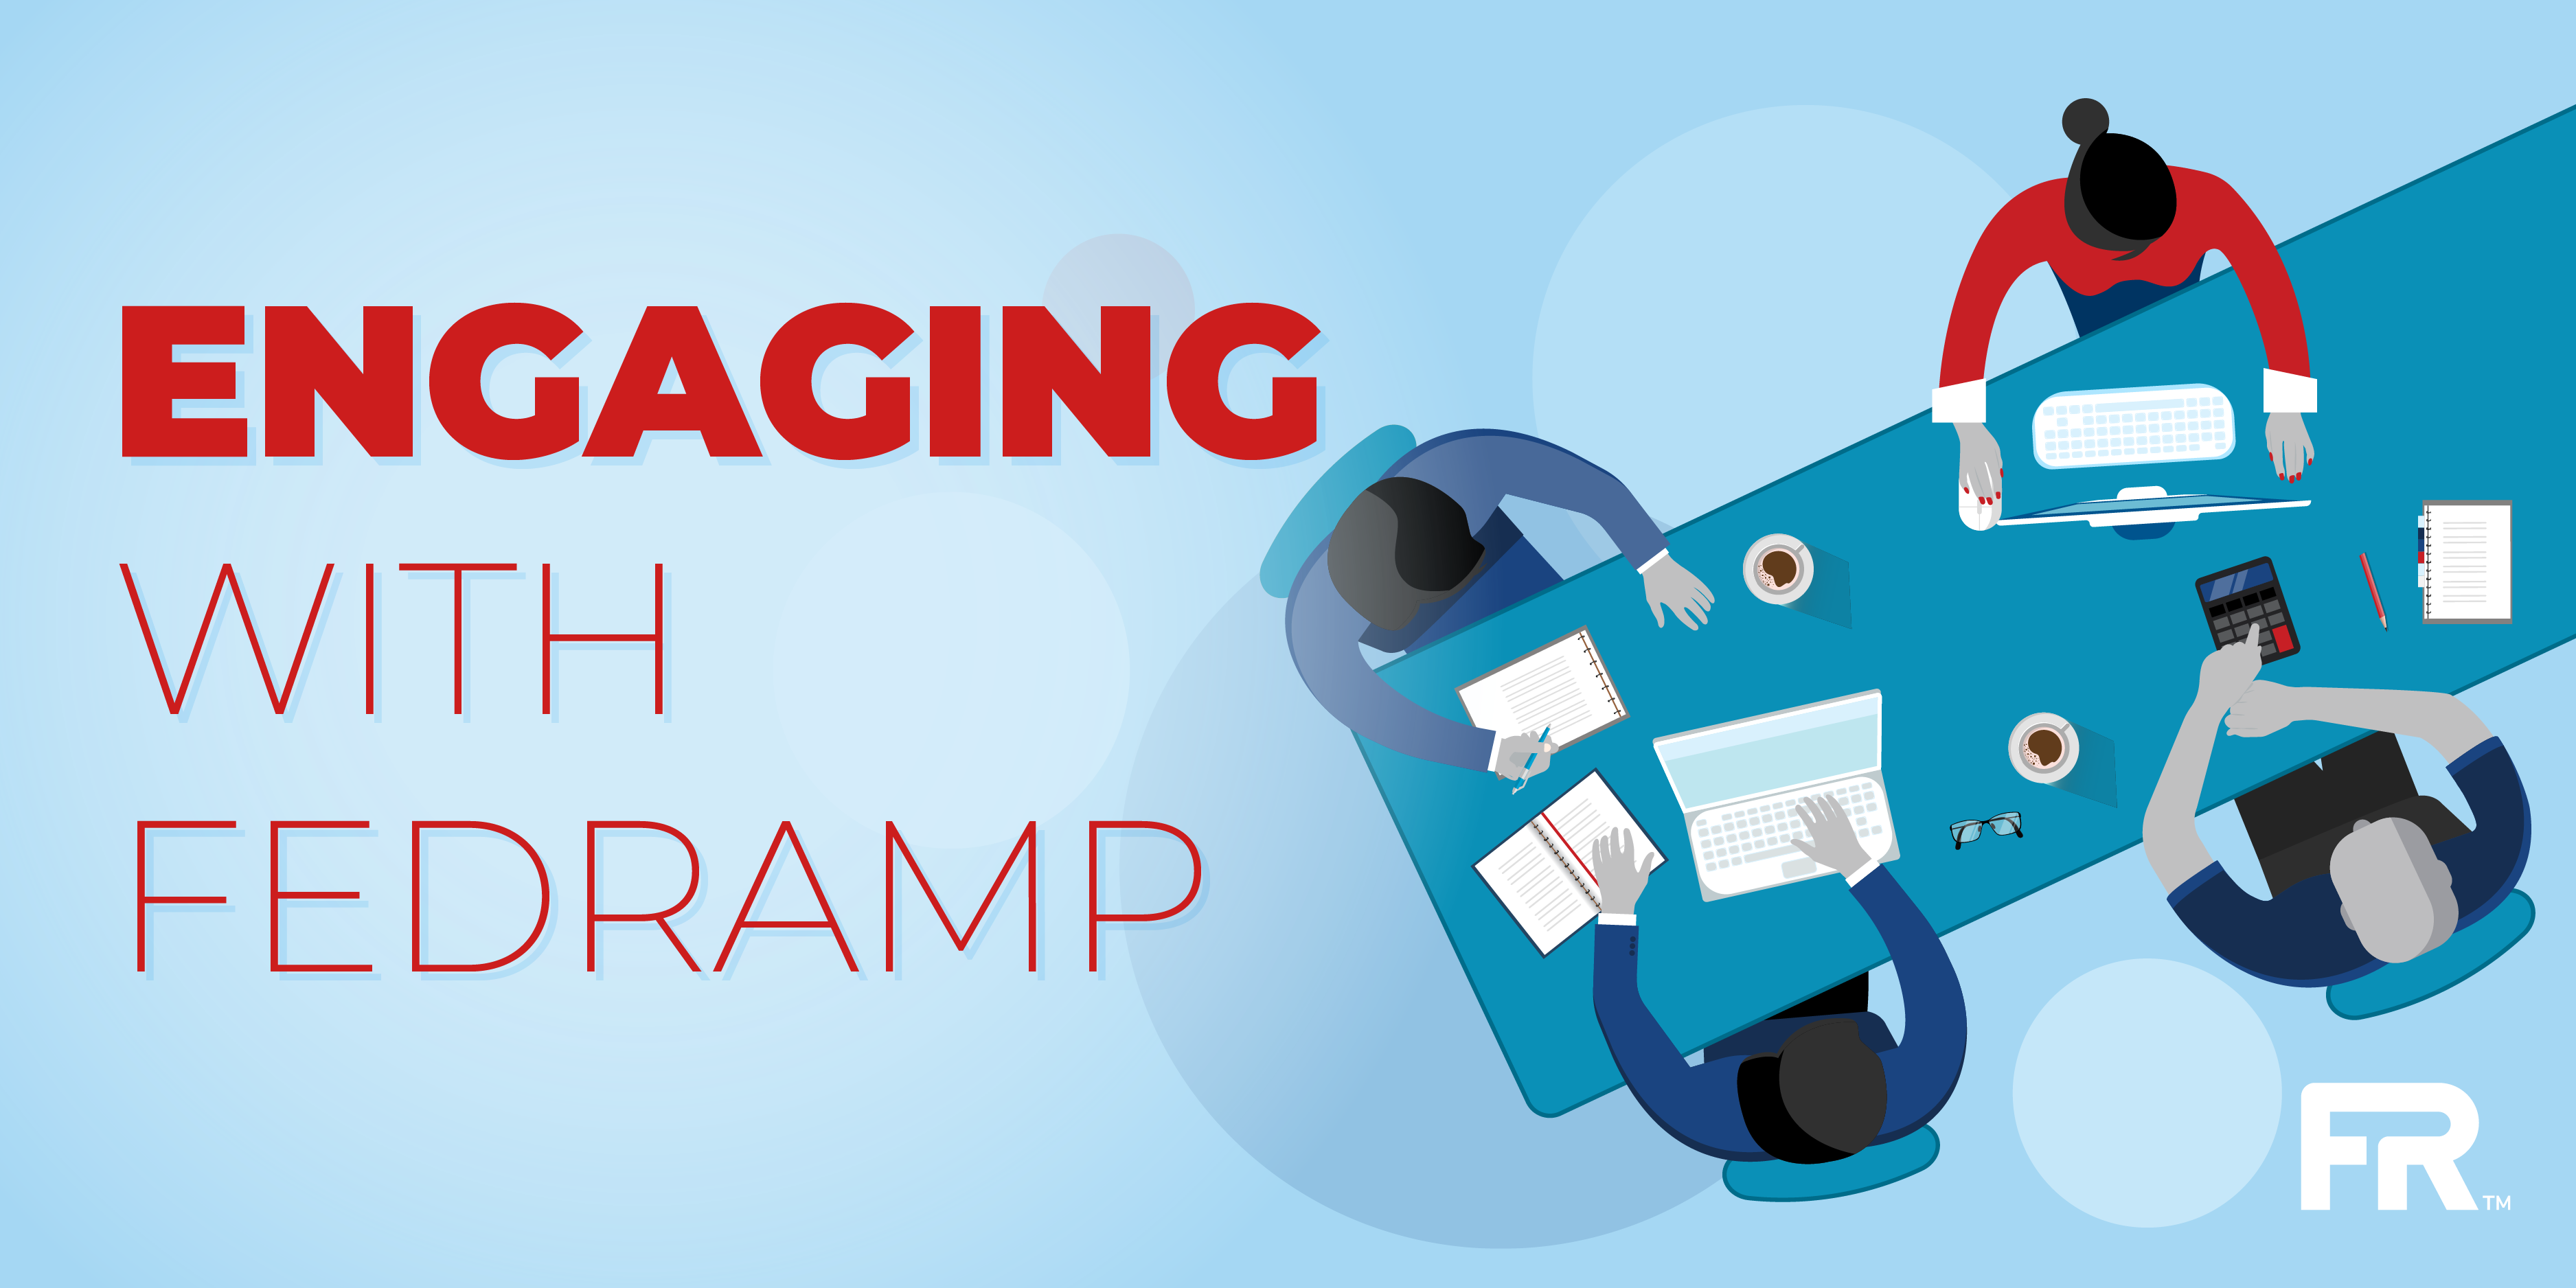 <b>Engaging with FedRAMP</b> - PART 2, The Kickoff Meeting